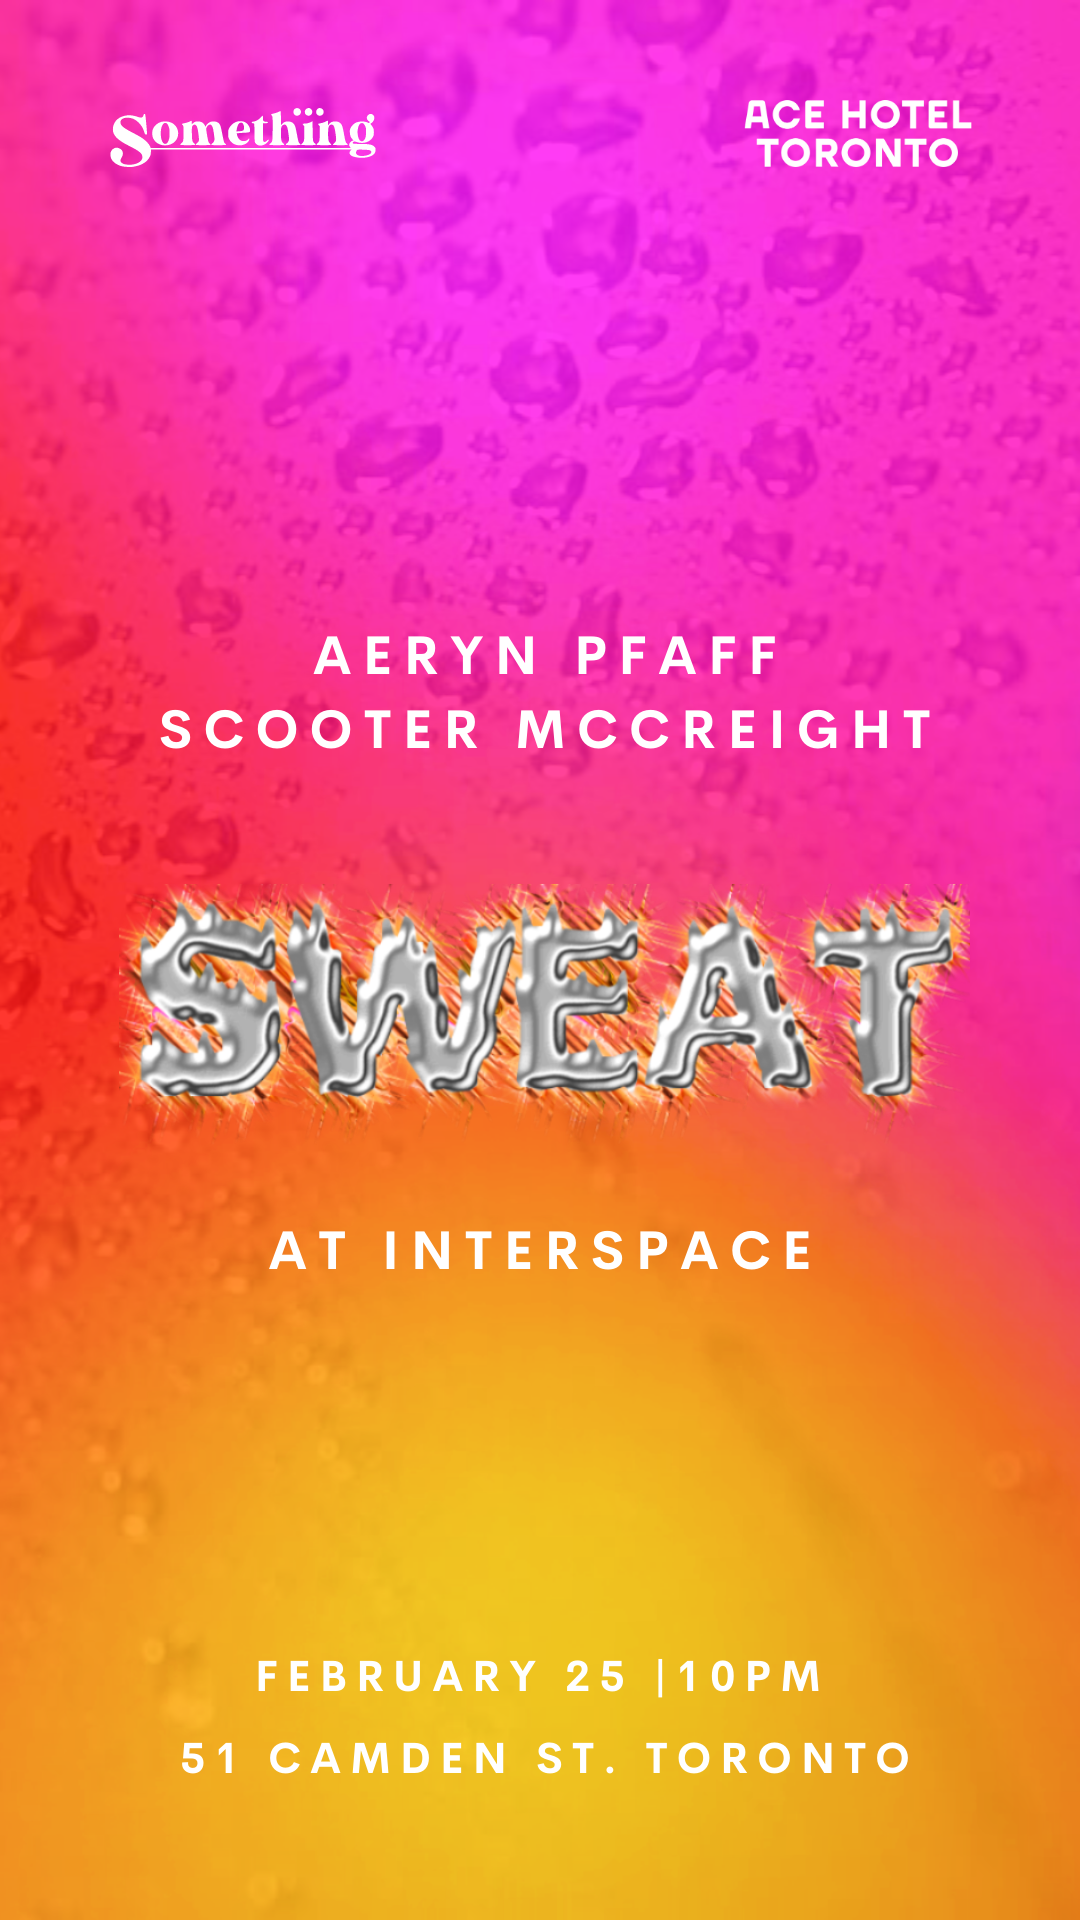 Get Ready to Sweat at Interspace - February 25 at 10PM